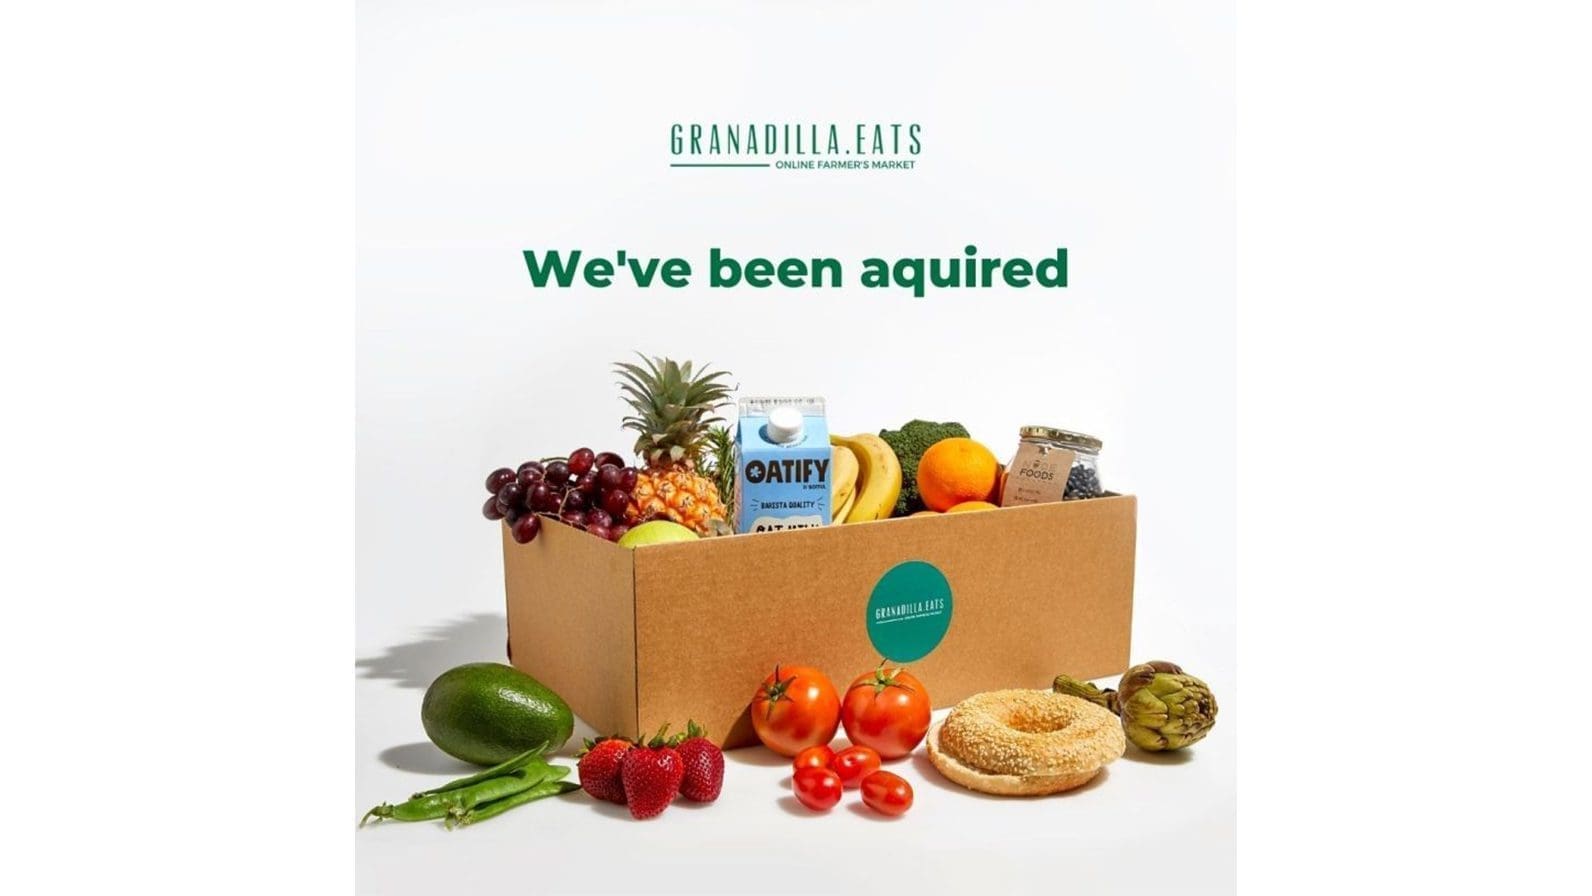 SA meal kit provider Ucook acquires Granadilla Eats to accelerates growth of grocery delivery